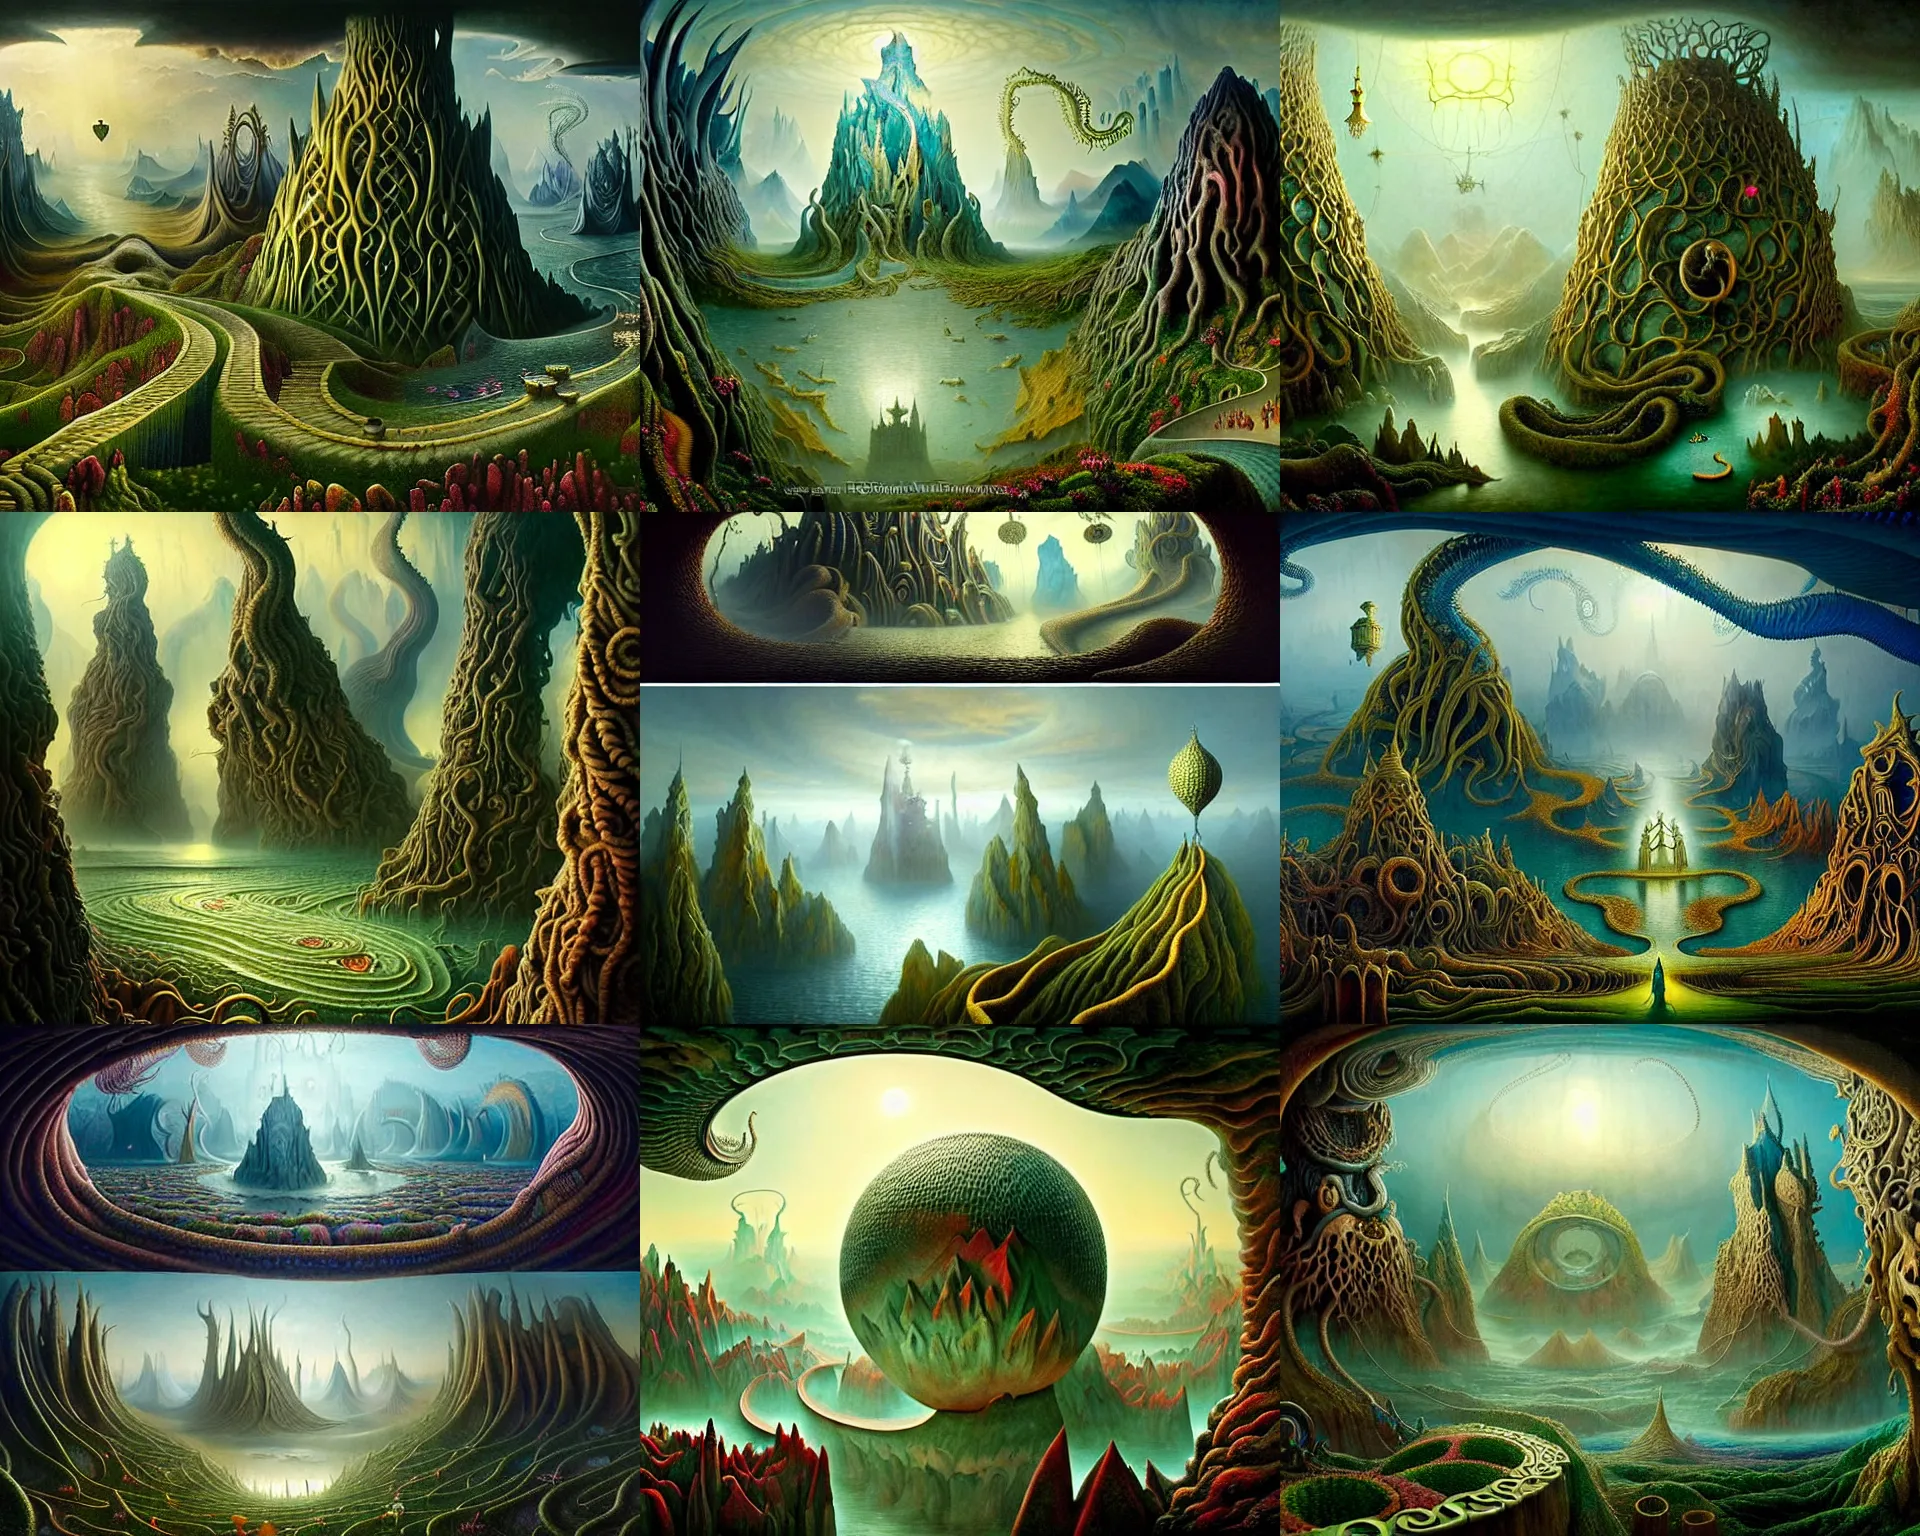 Prompt: a beguiling epic stunning beautiful and insanely detailed matte painting of the impossible winding path into lovecraftian dream worlds with surreal architecture designed by Heironymous Bosch, mega structures inspired by Heironymous Bosch's Garden of Earthly Delights, vast surreal landscape and horizon by Asher Durand and Peter Morbacher, masterpiece!!!, masterpiece!!!, grand!, imaginative!!!, whimsical!! intricate details, sense of awe, elite, wonder, insanely complex, masterful composition!!!, sharp focus, protagonist in foreground, fantasy realism, dramatic lighting